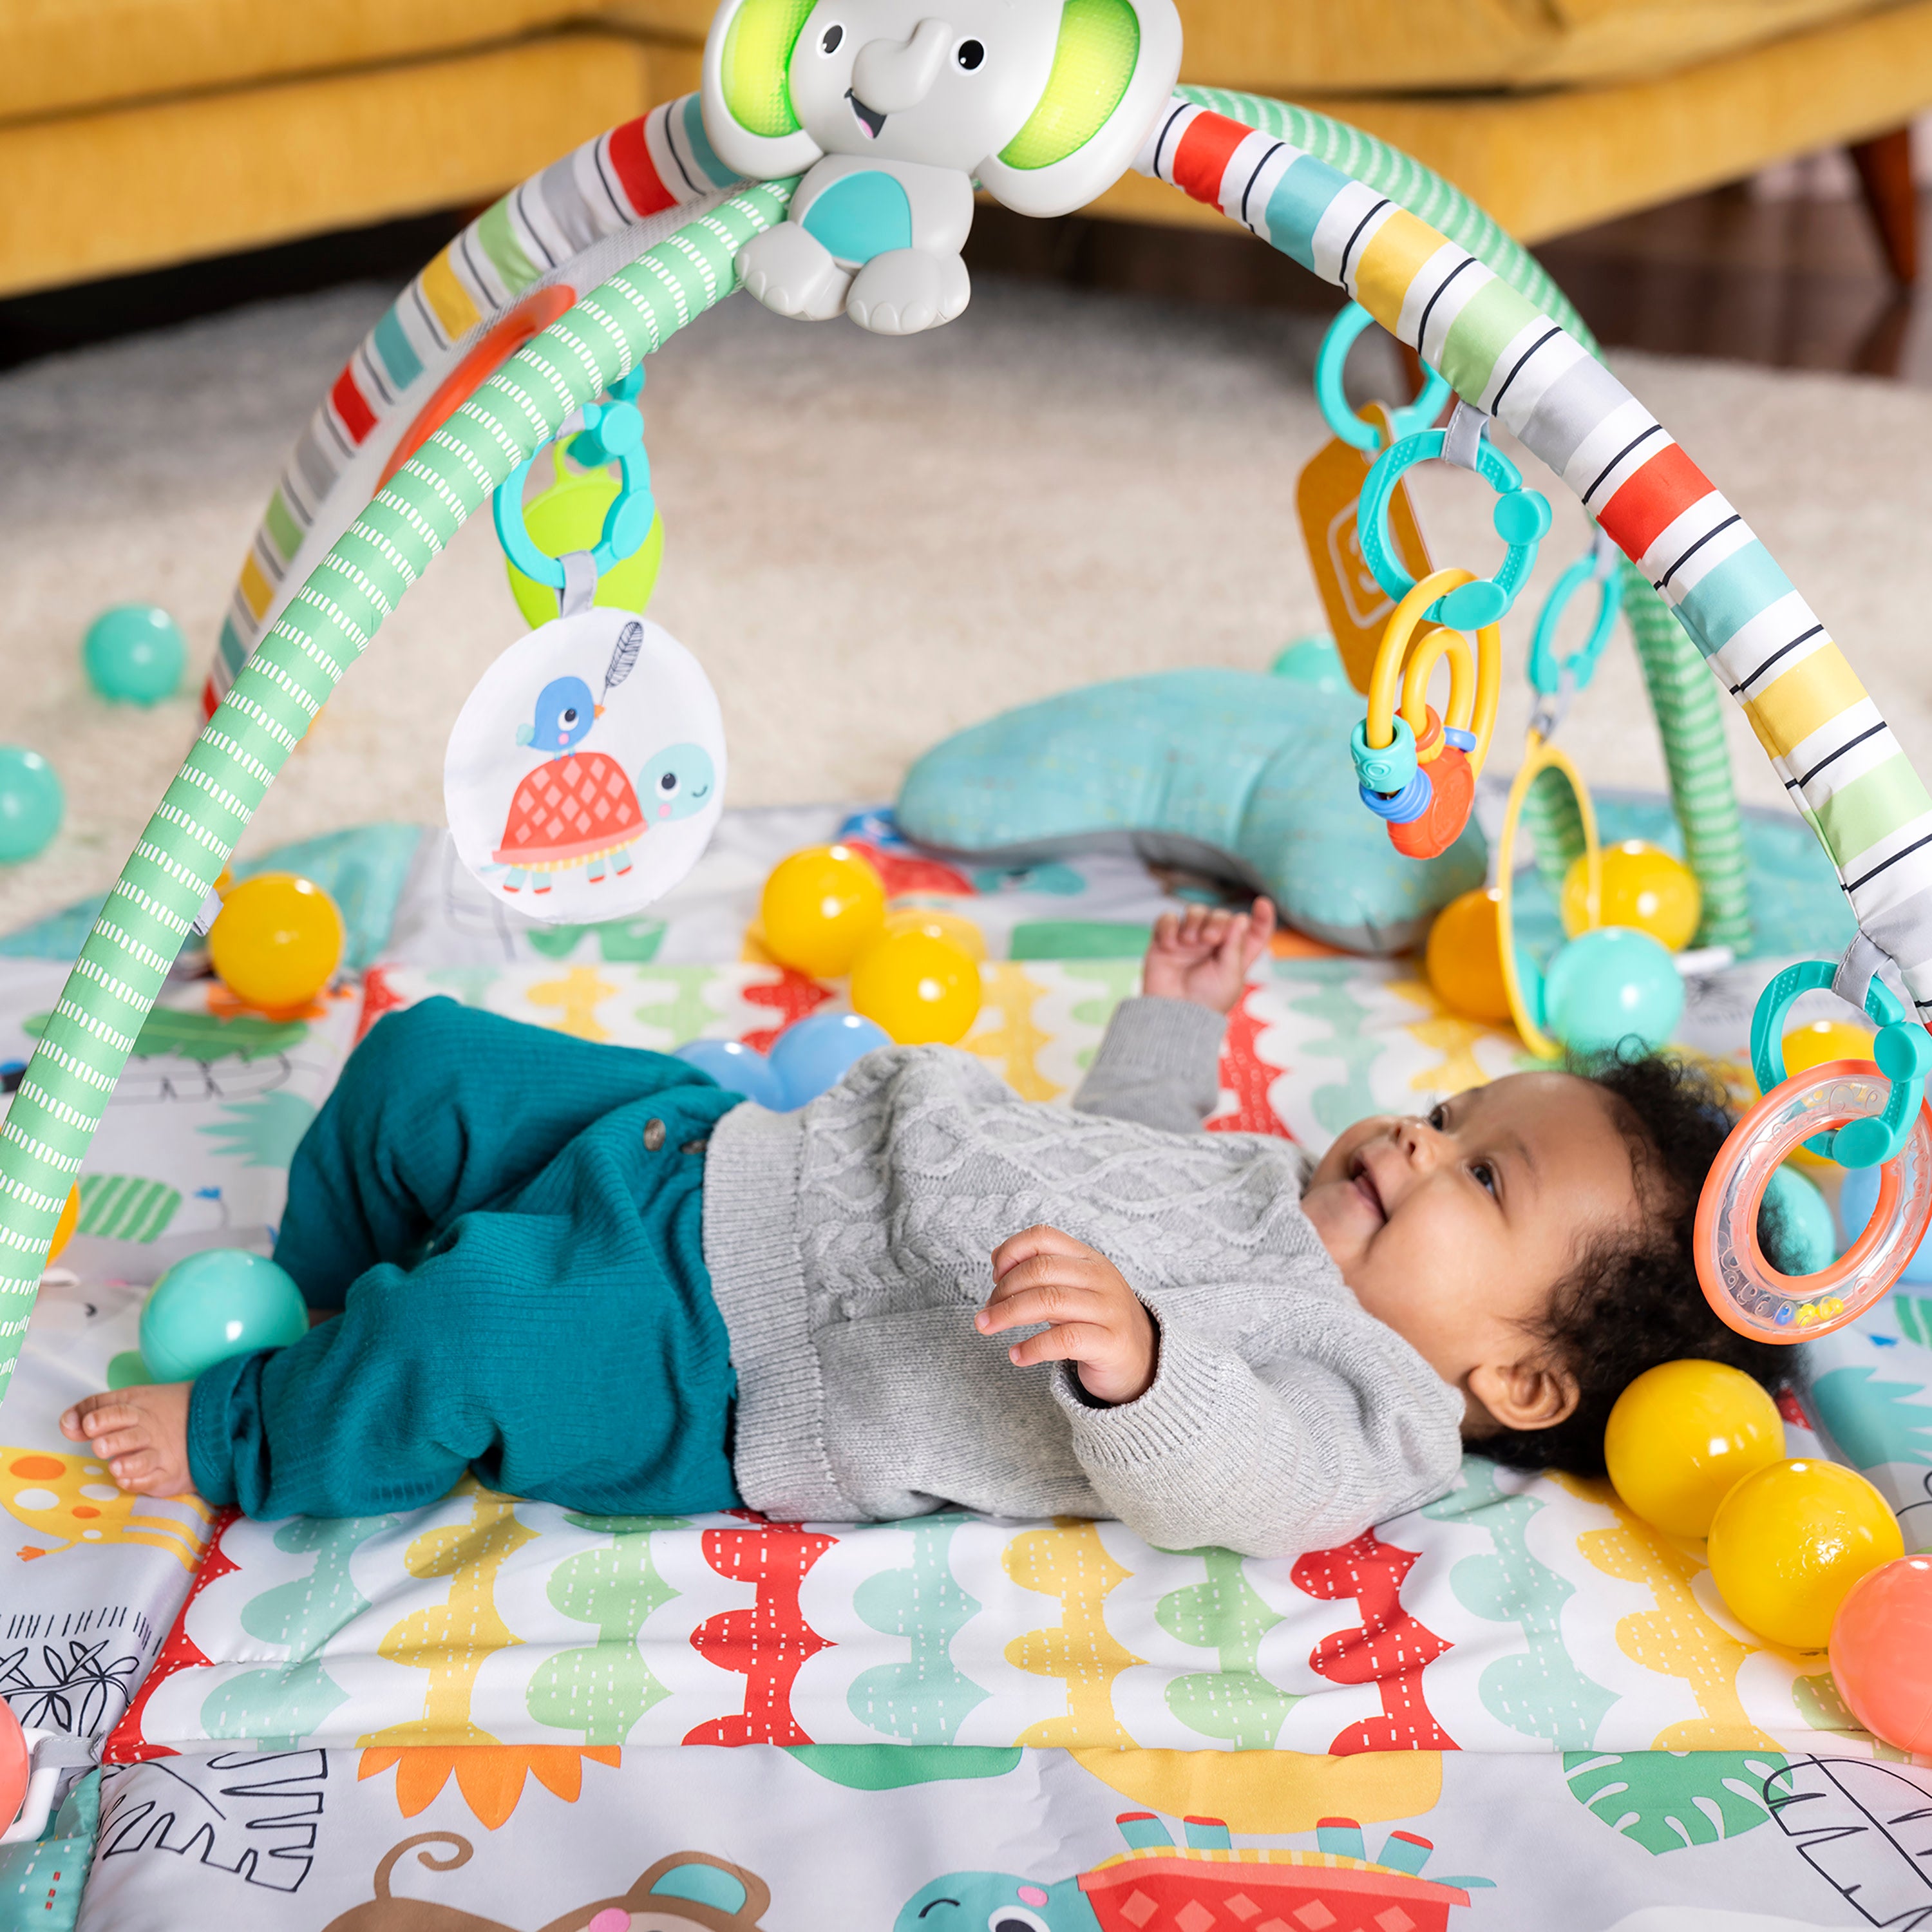 Bright Starts 5-in-1 Your Way Ball Play Activity Gym & Ball Pit